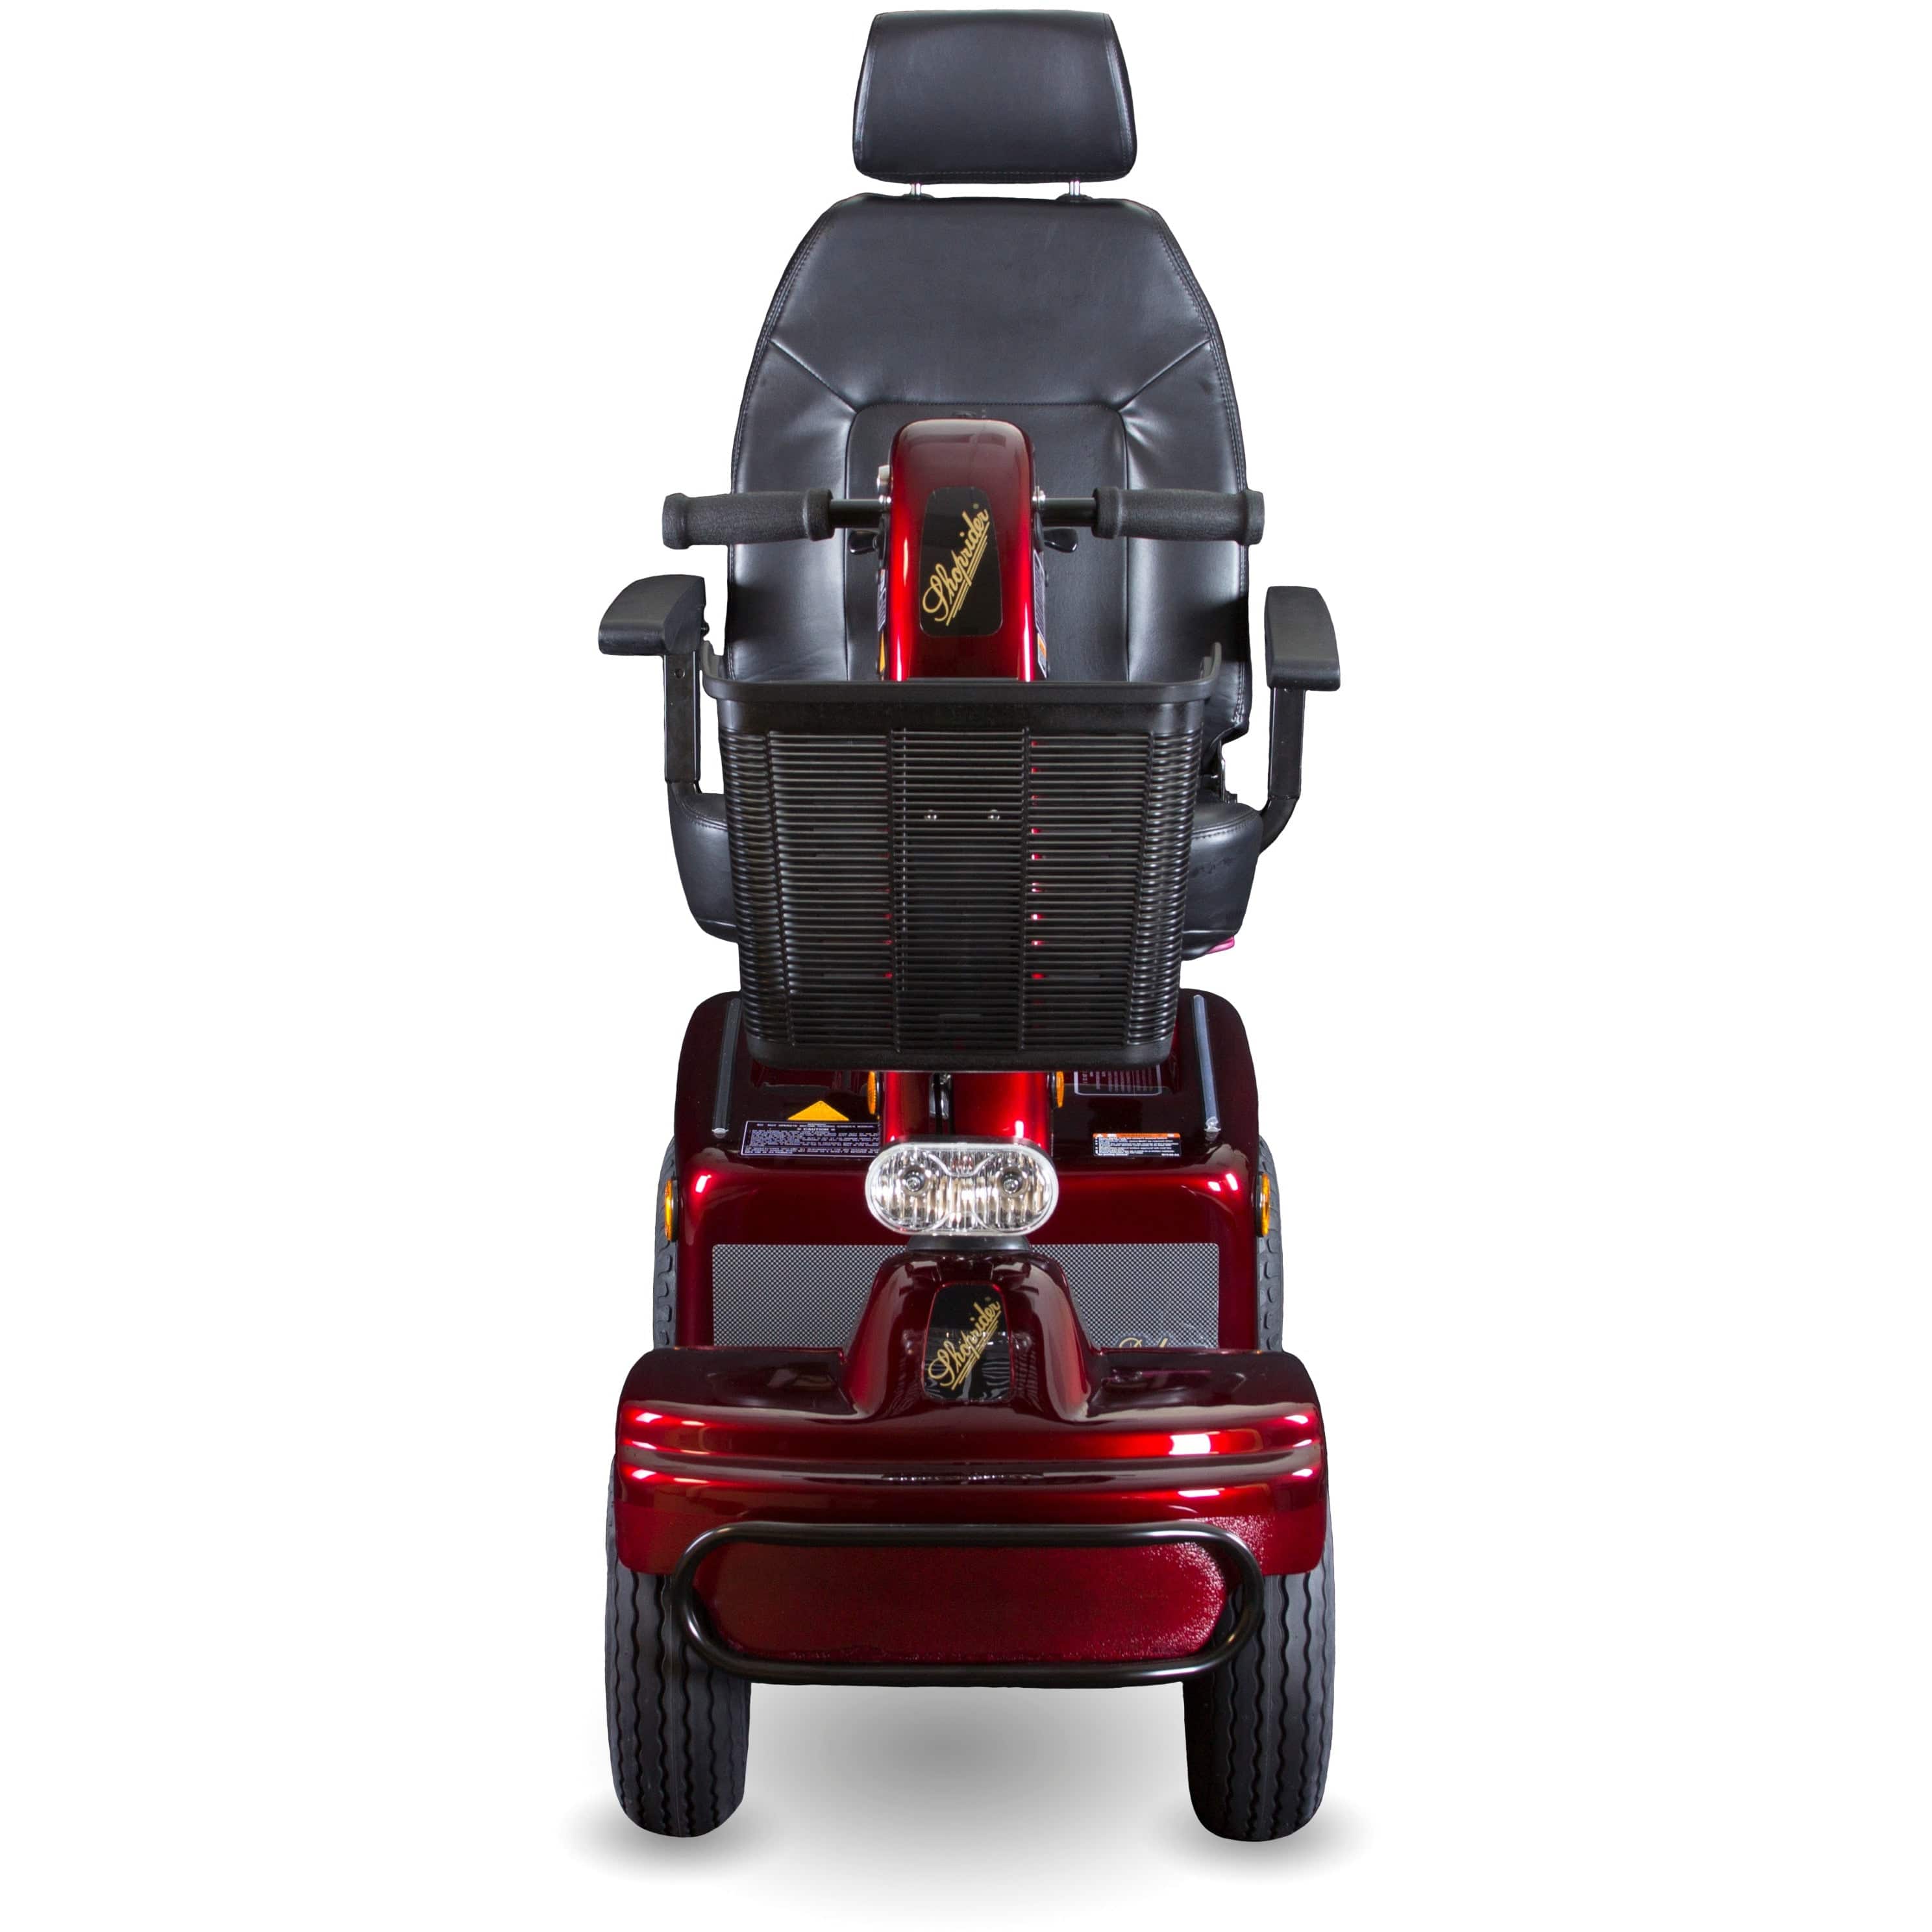 Shoprider Sprinter XL4 Heavy Duty 4-Wheel Scooter 889B-4 Mobility Scooters Shoprider   